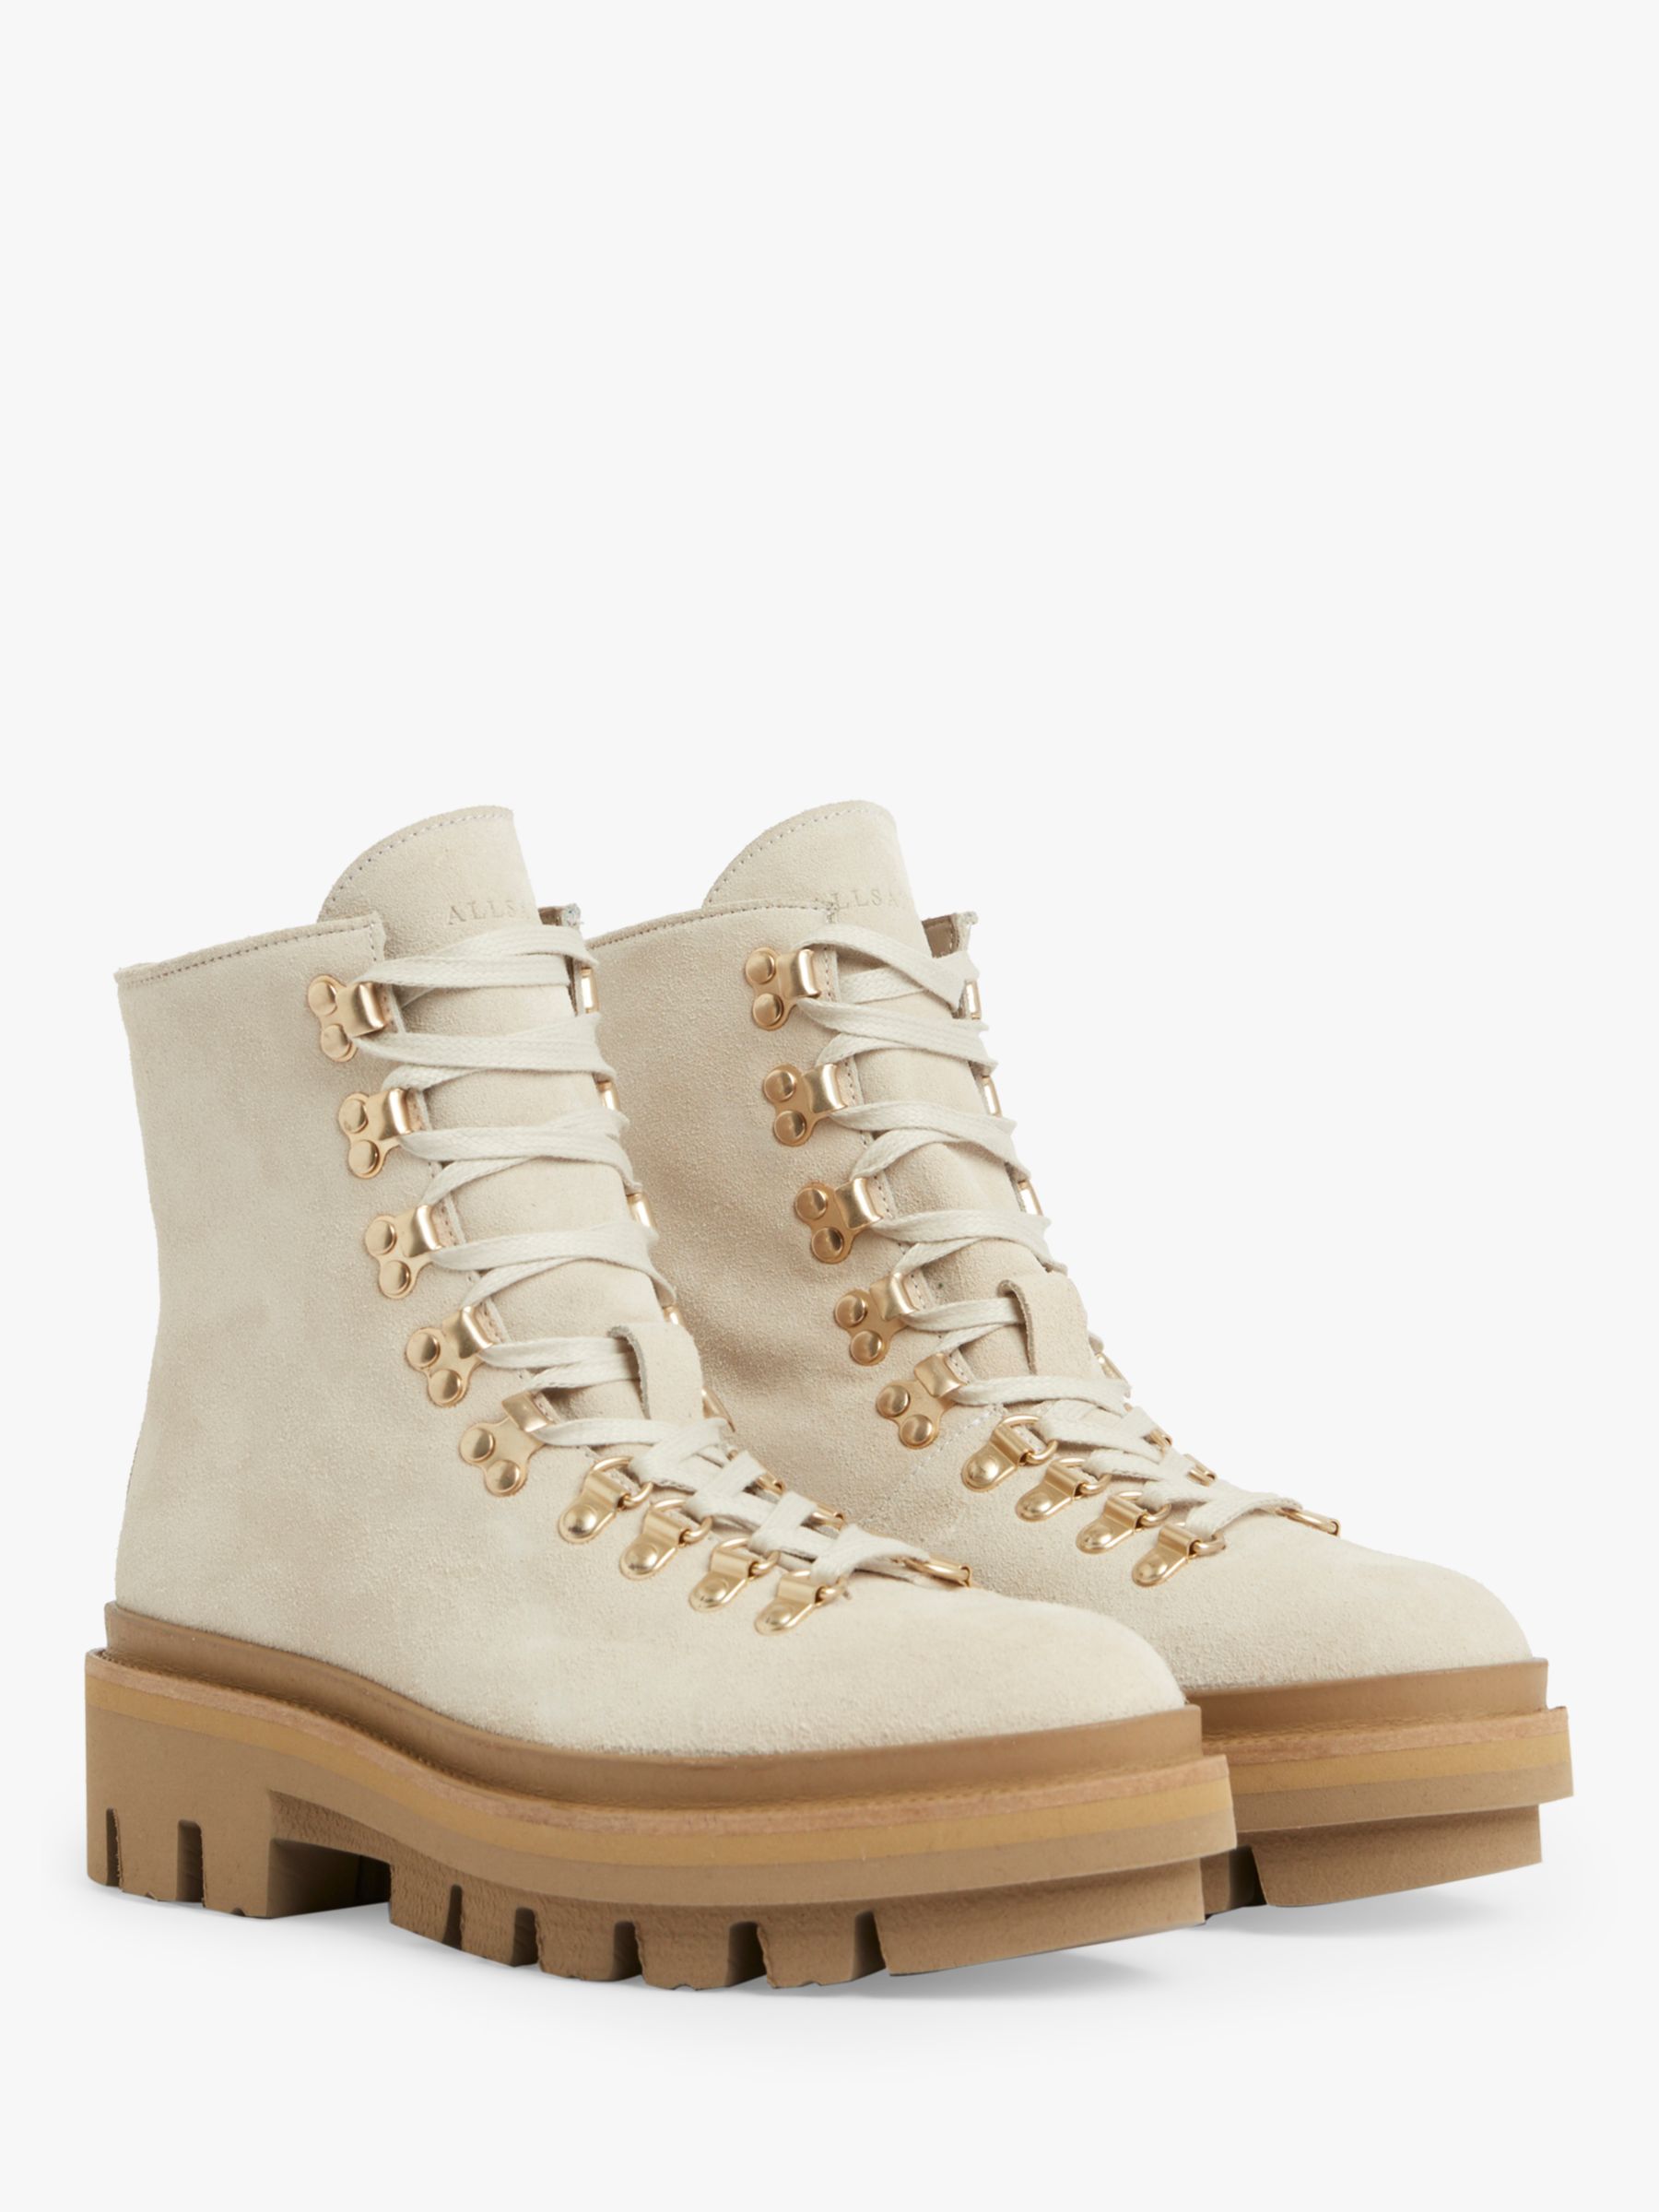 AllSaints Wanda Suede Hiking Boots, White at John Lewis & Partners